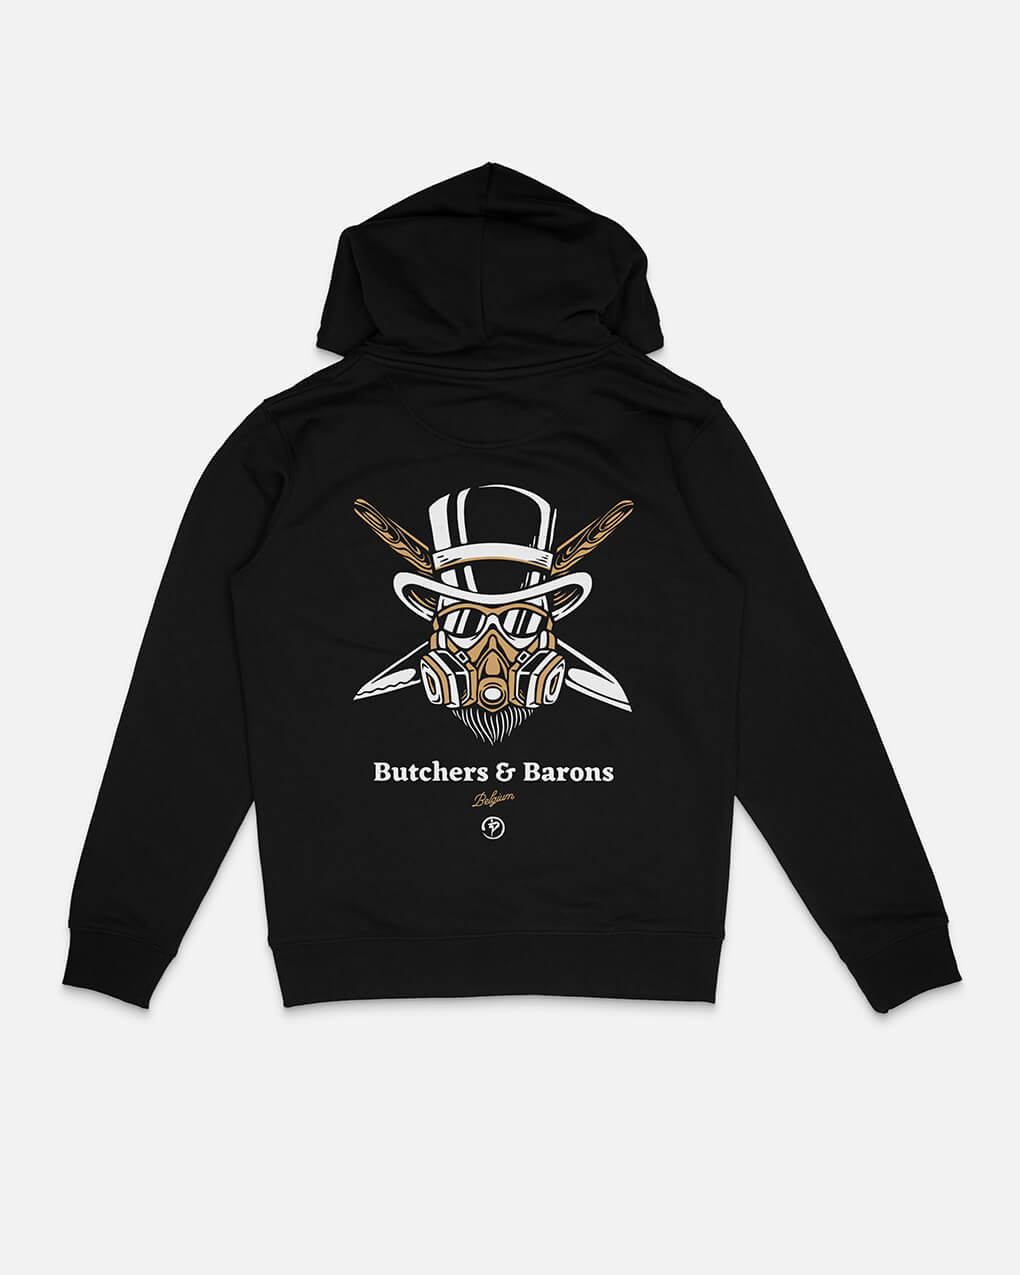 "Knife Maker" limited edition hoodie by Butchers & Barons